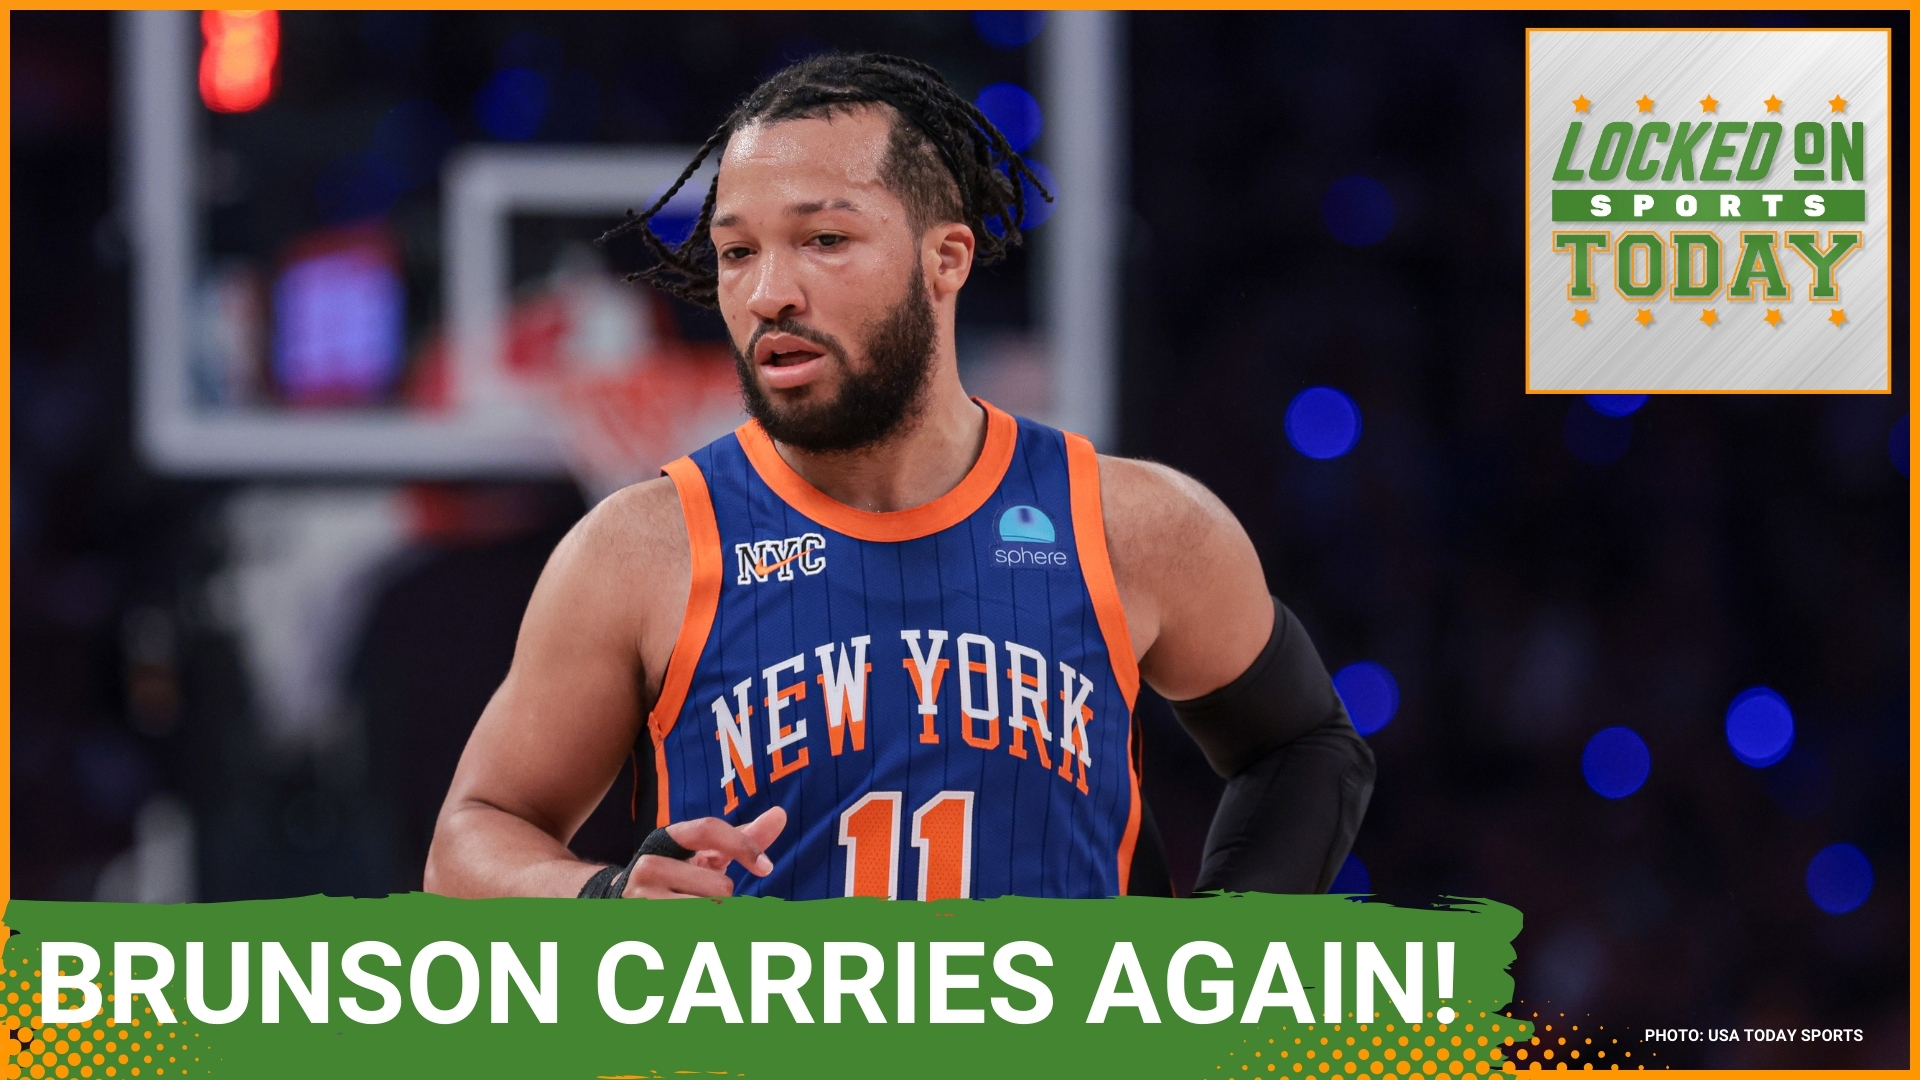 Jalen Brunson has wide shoulders to carry the New York Knicks in Game 5 vs the Indiana Pacers. Also, Caitlin Clark set the wrong kind of WNBA debut record.